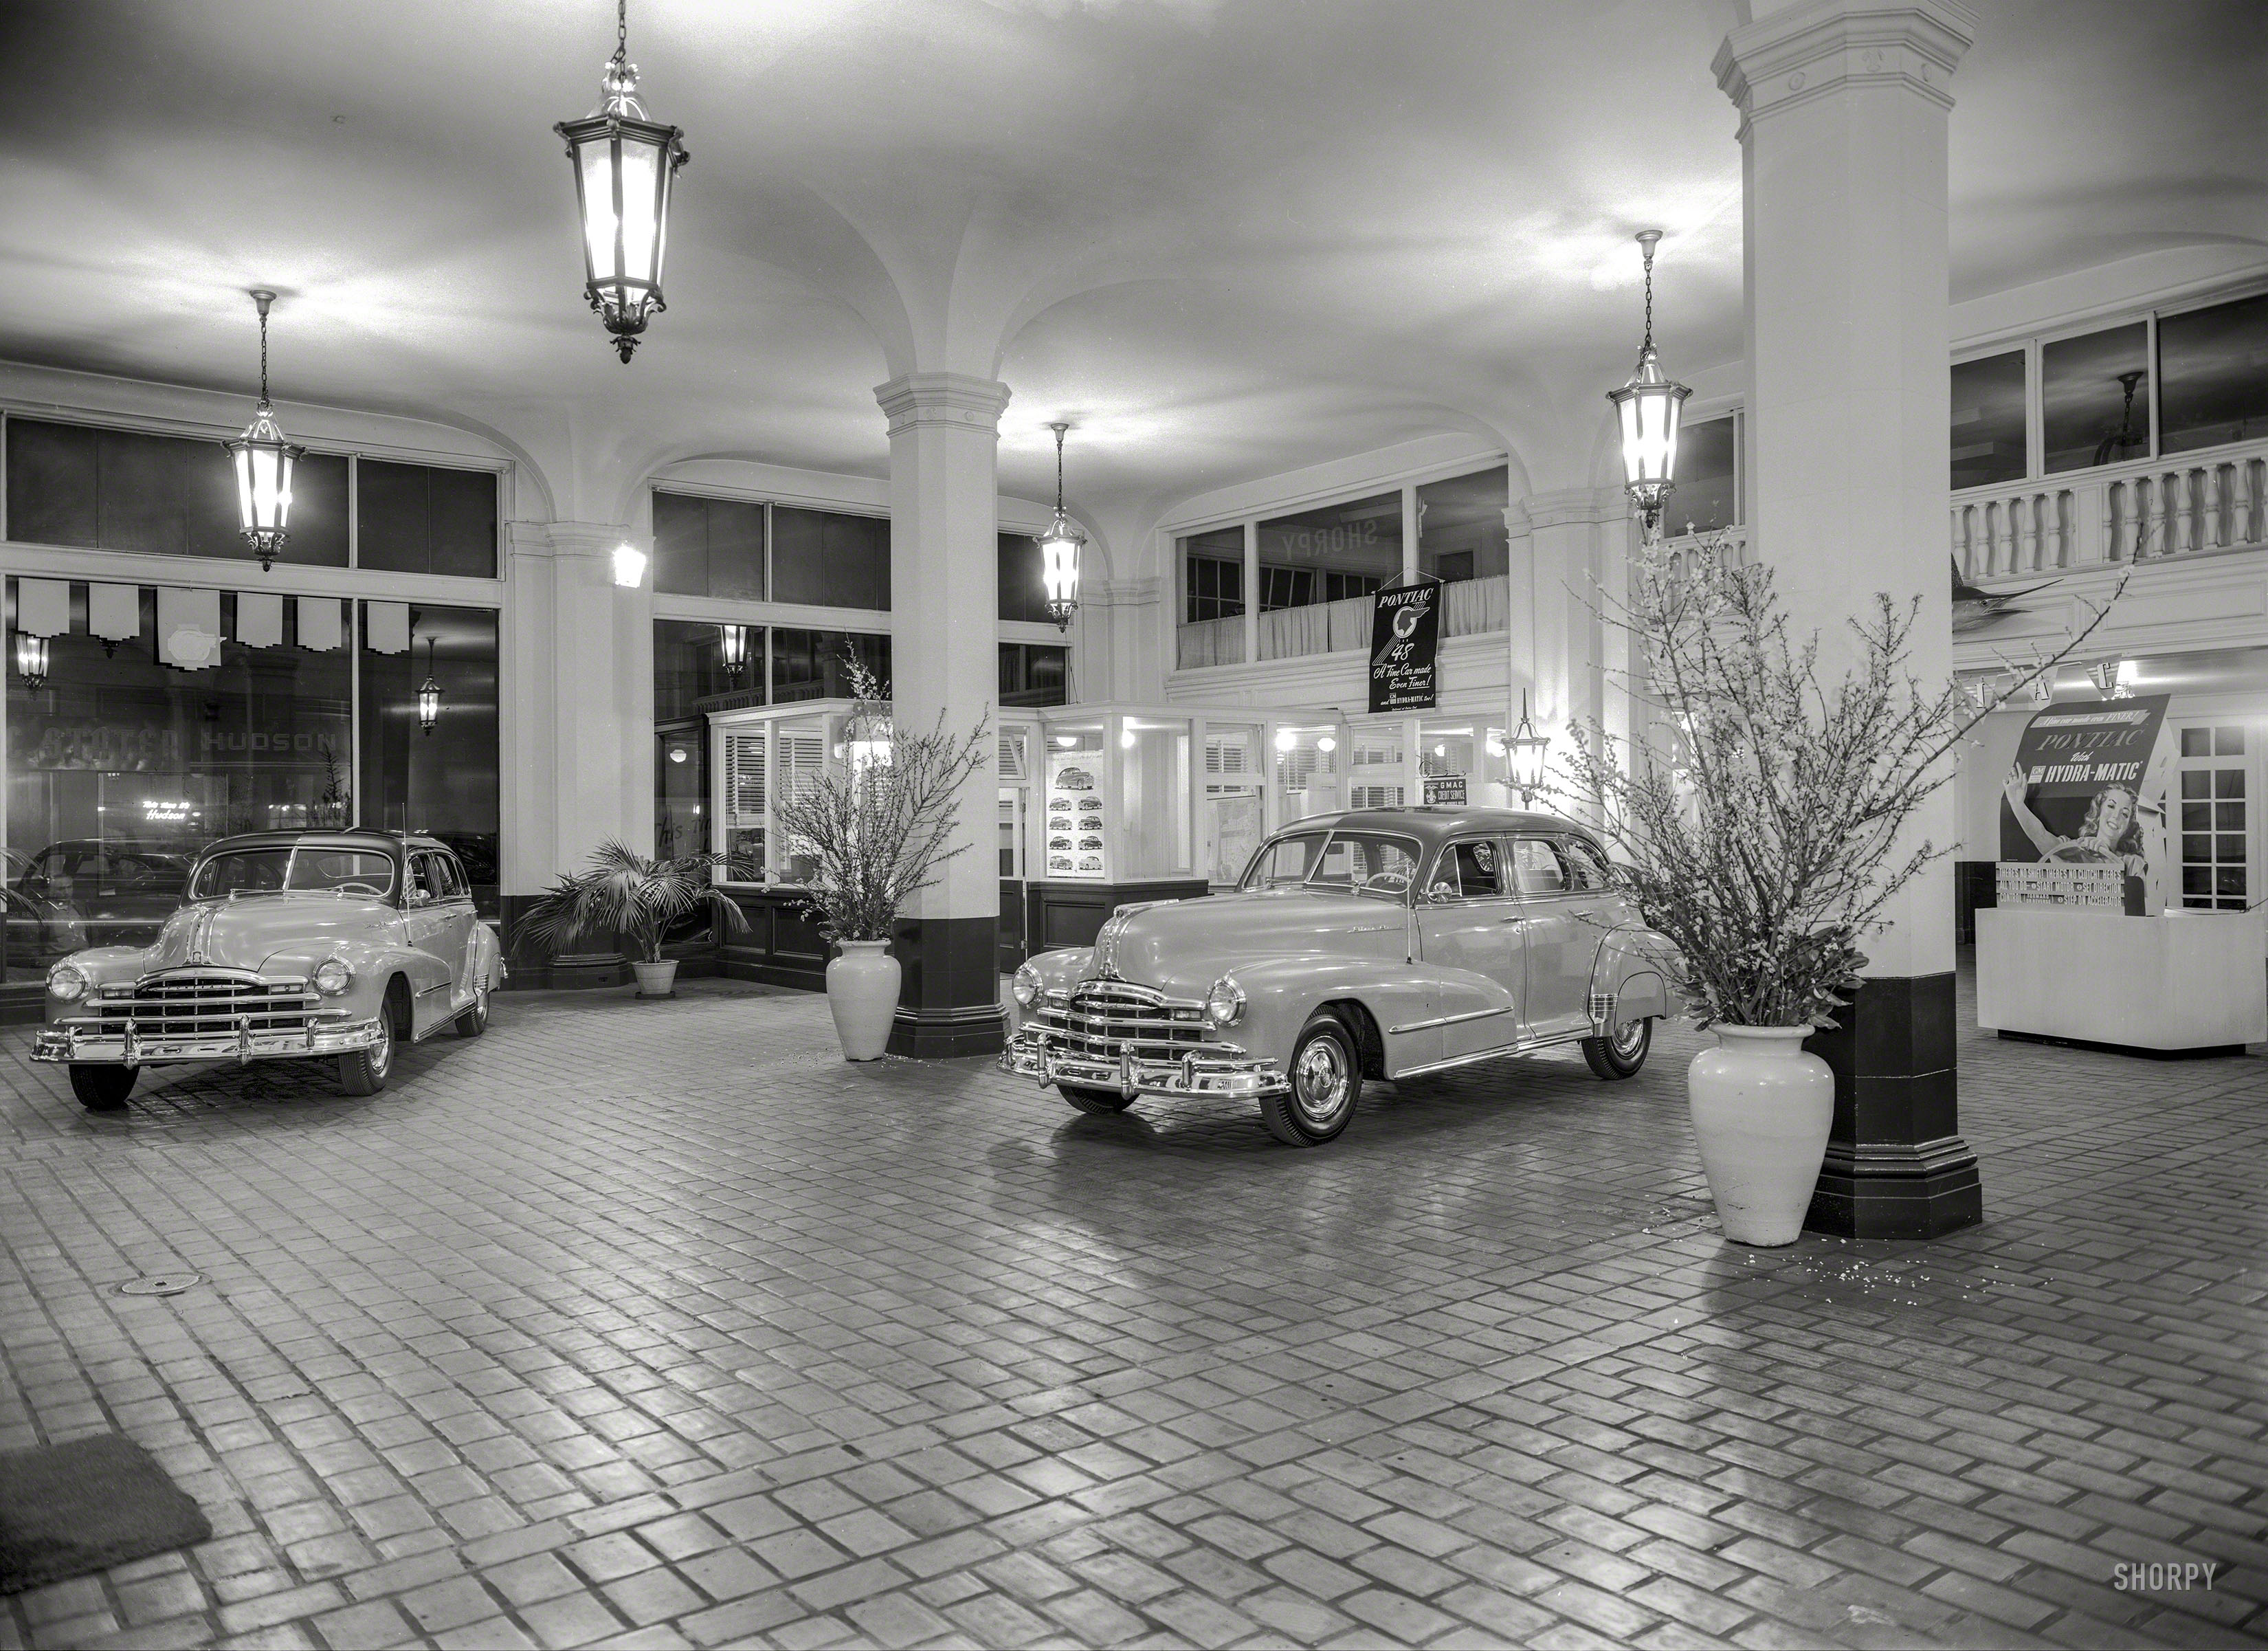 From San Francisco circa 1948 comes this nighttime shot of a Pontiac showroom, which our learned commenters reveal was at 1560 Van Ness Avenue. 8x10 inch Kodak safety negative, photographer unknown. View full size.